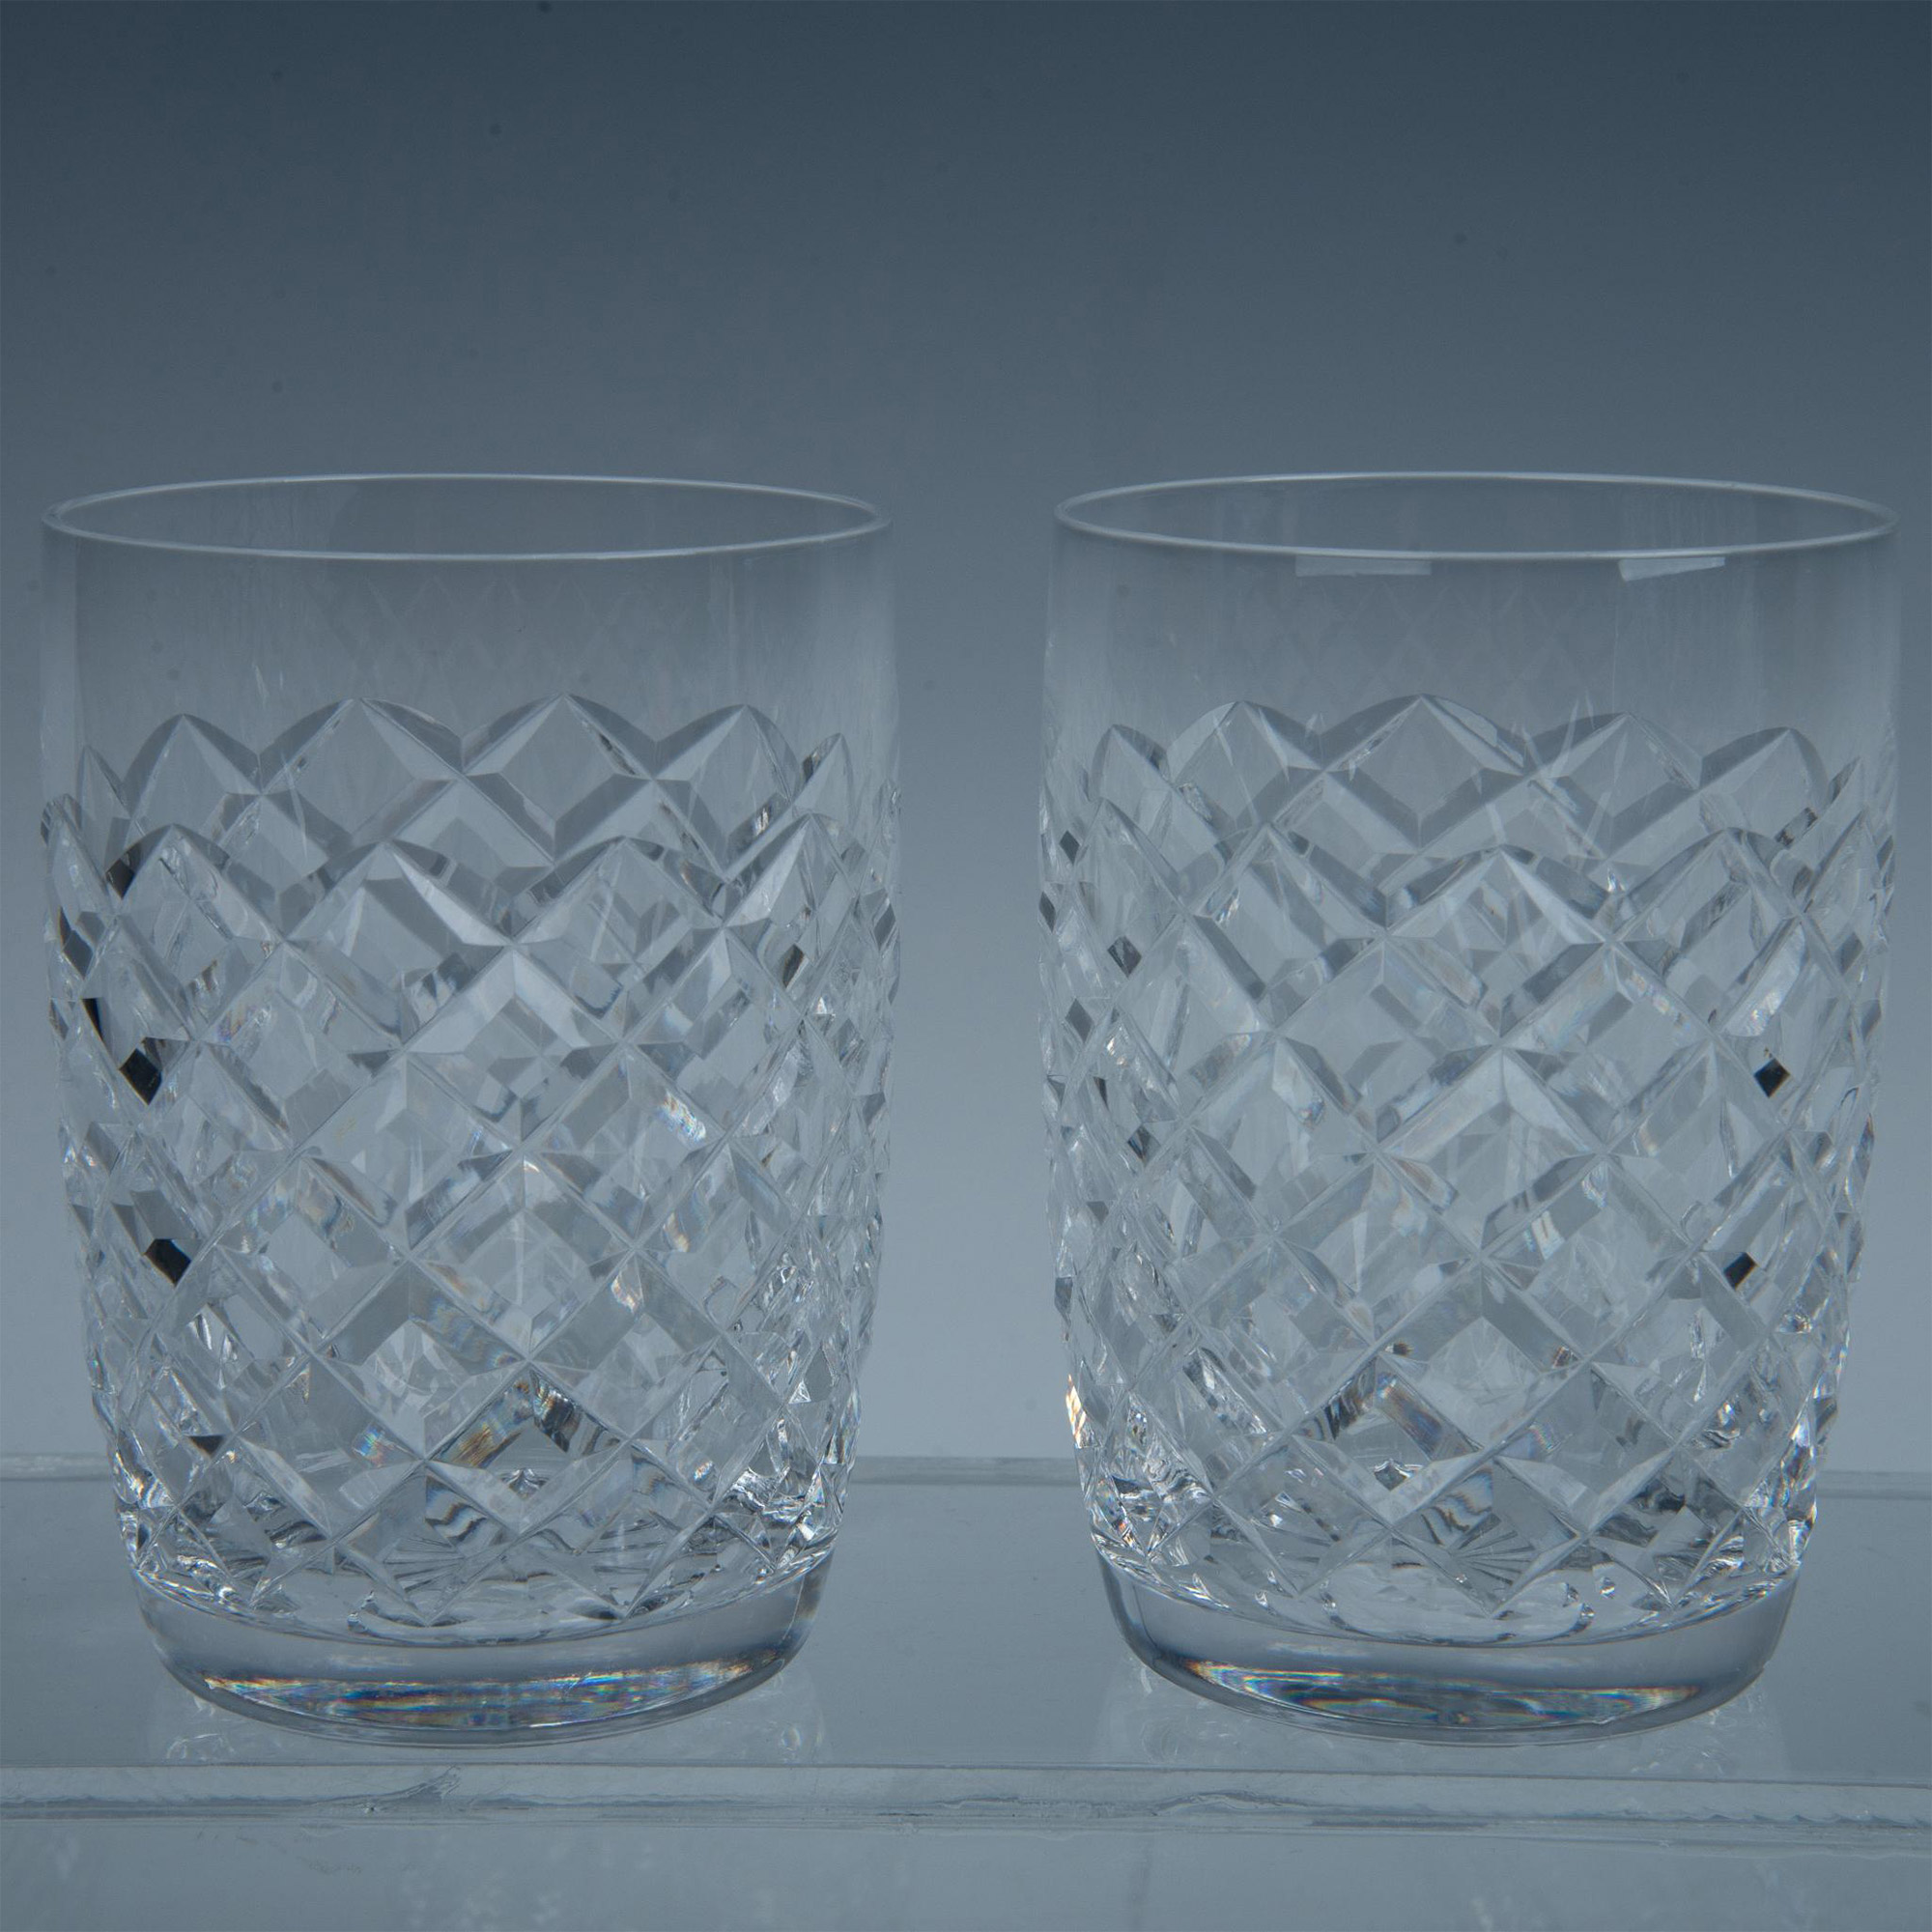 8pc Waterford Crystal Tumblers, Comeragh - Image 2 of 4